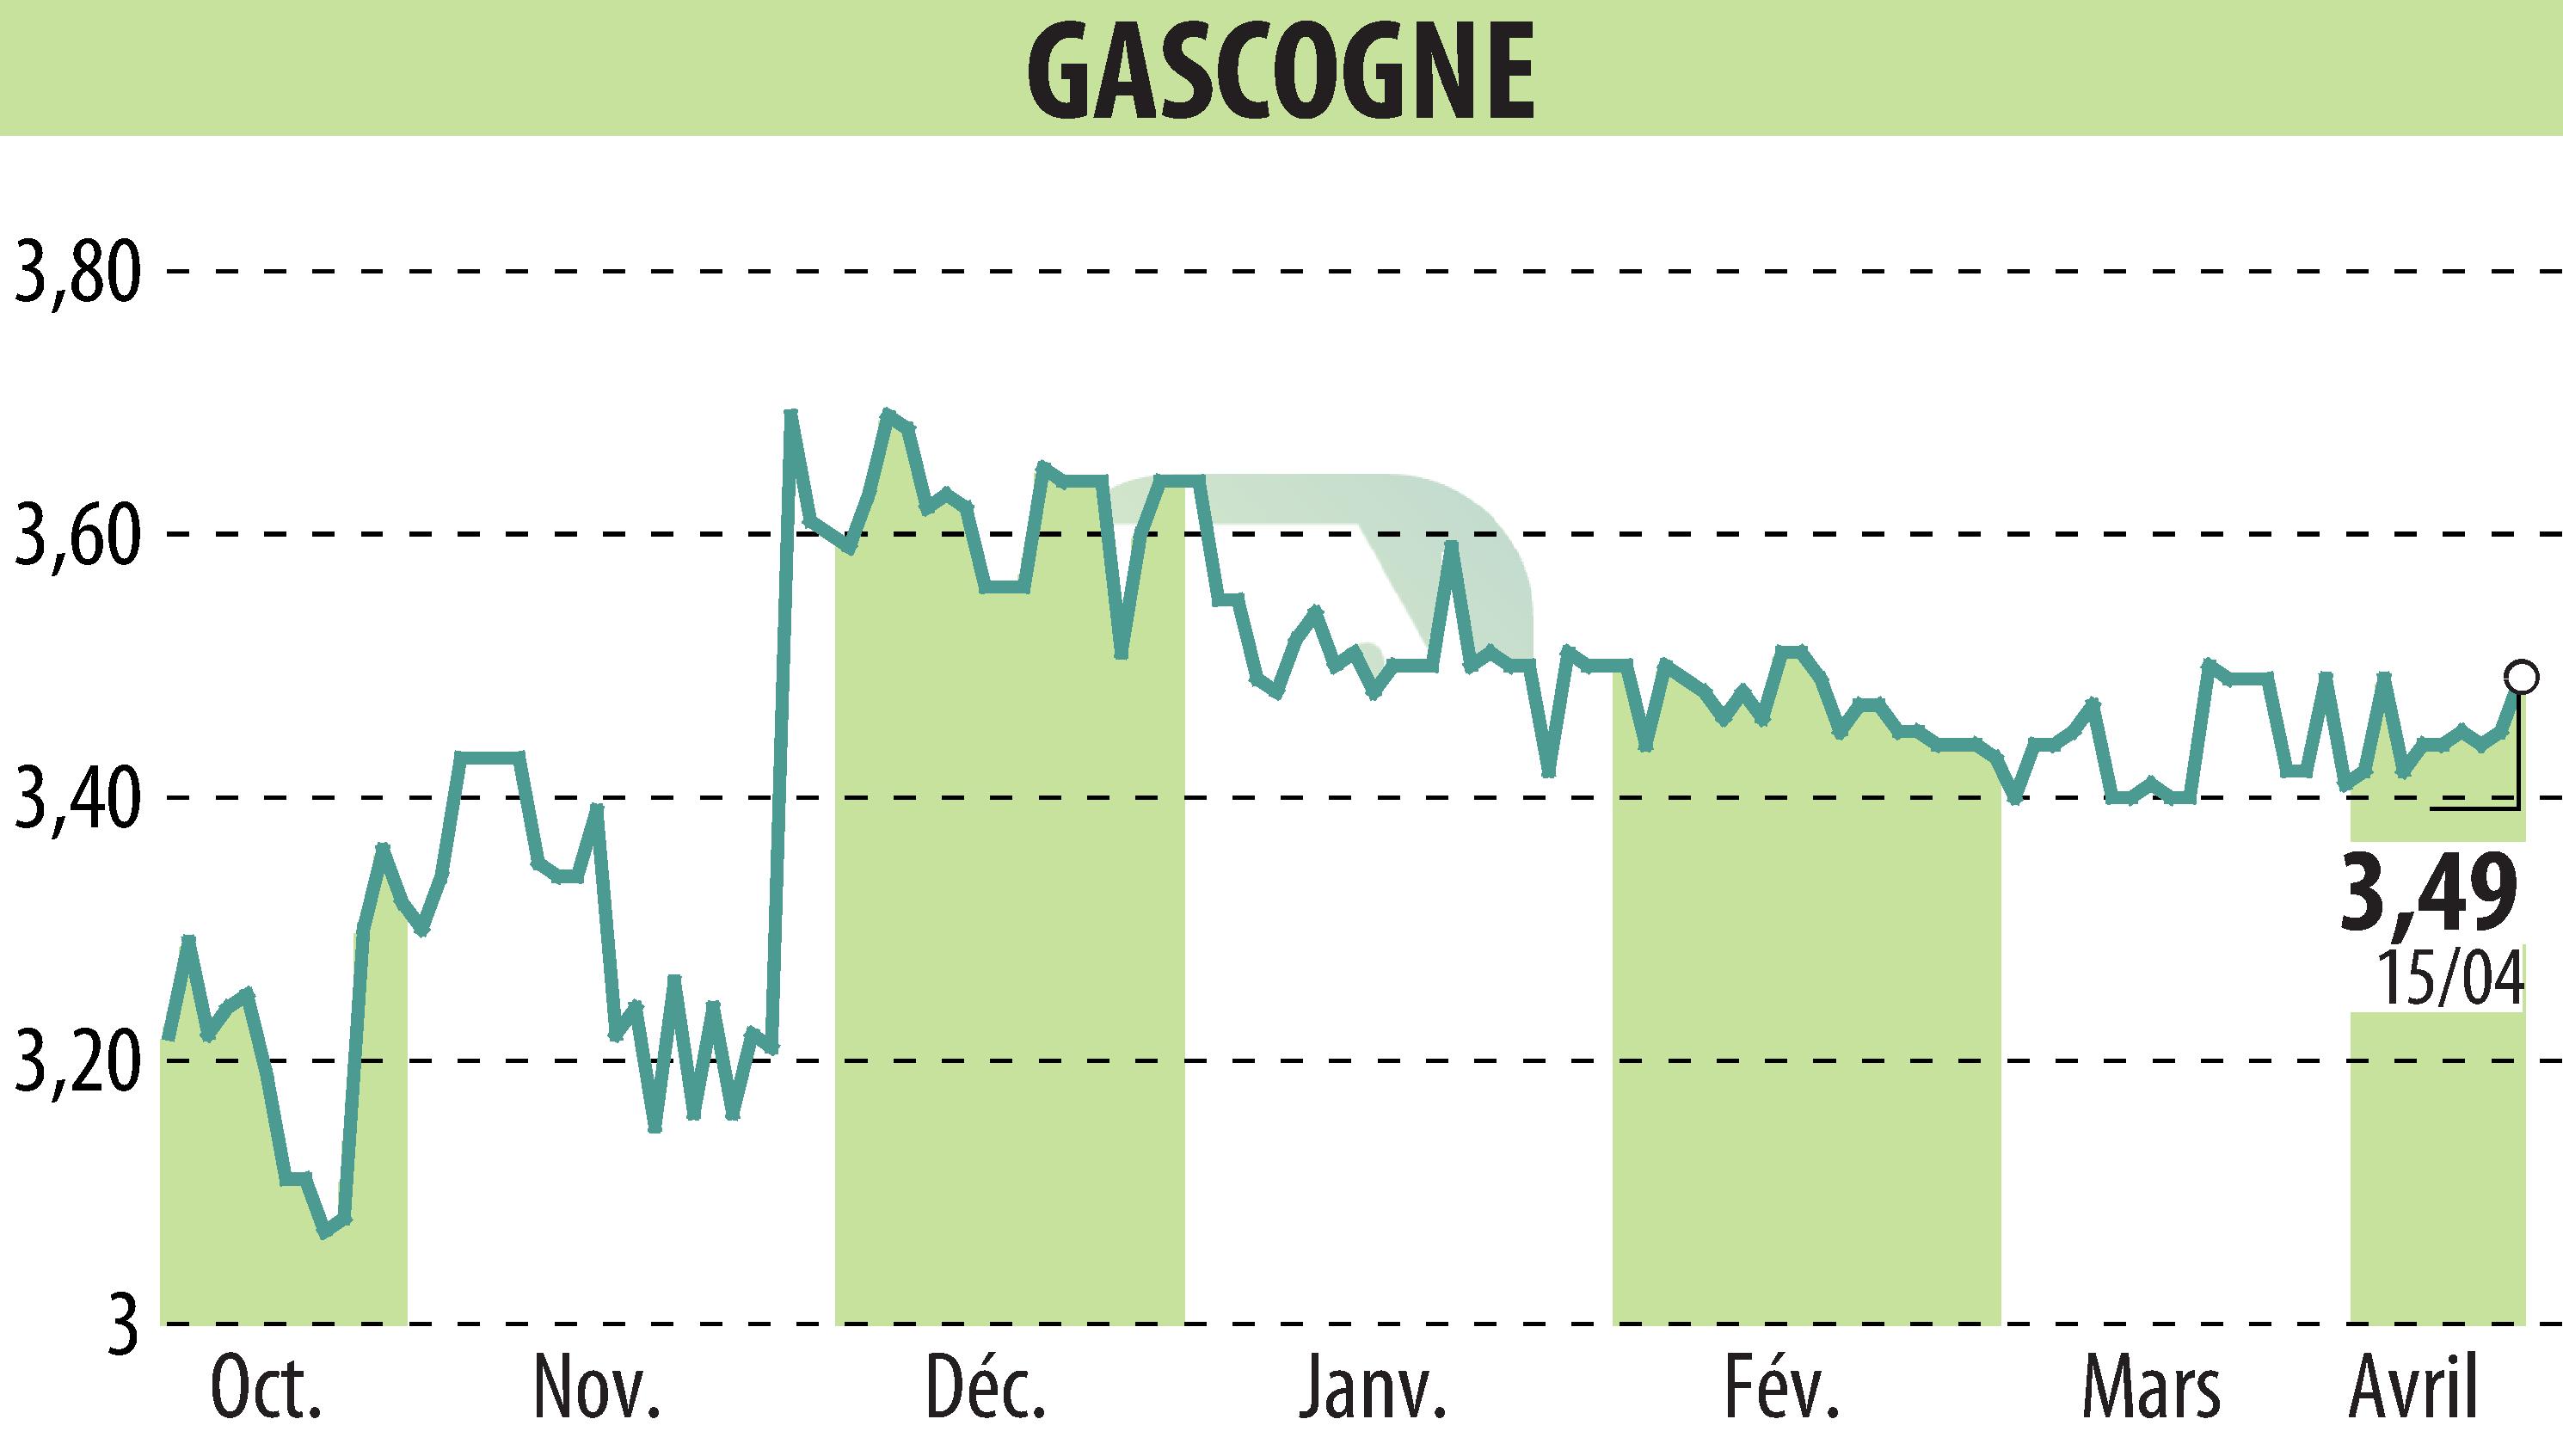 Stock price chart of GROUPE GASCOGNE (EPA:ALBI) showing fluctuations.